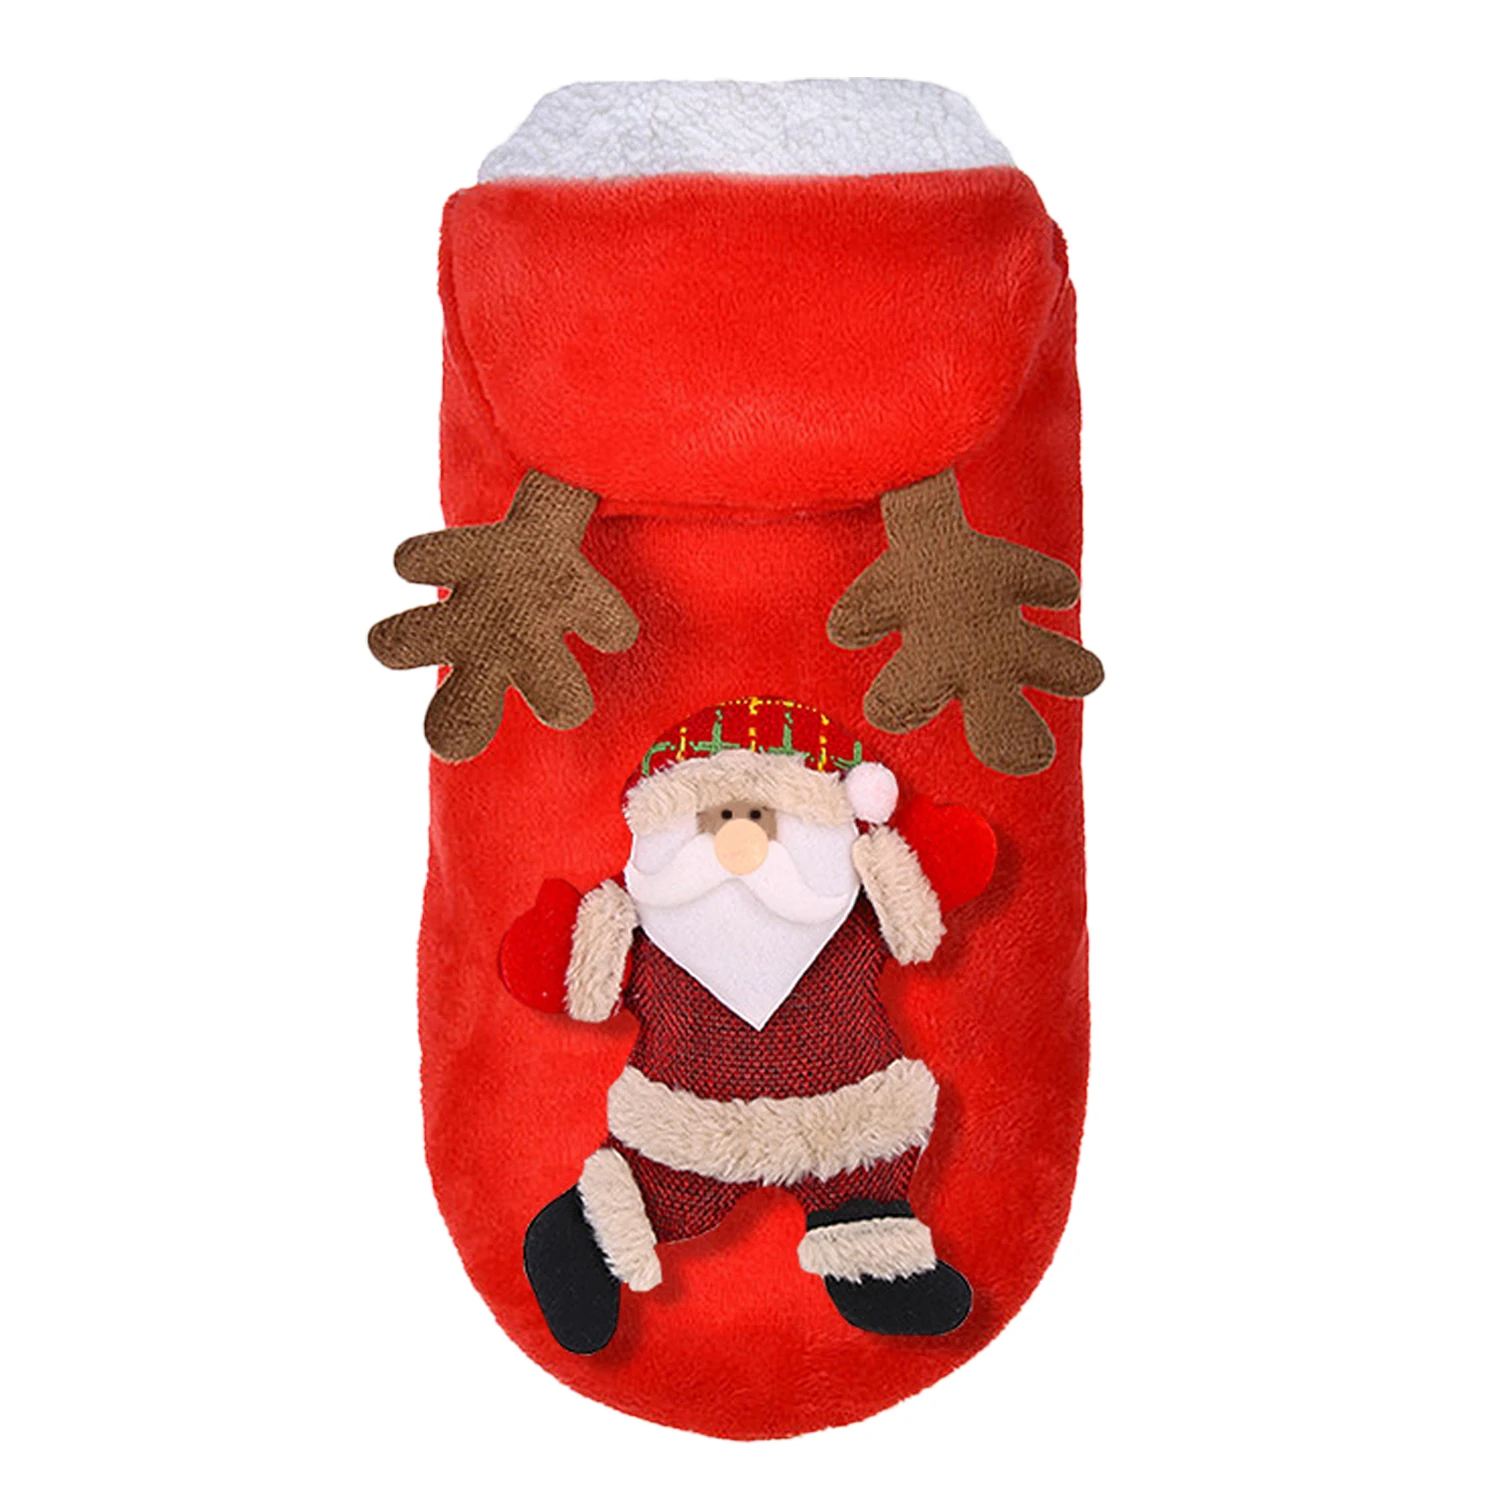 Christmas Cats Dogs Clothes Cute Reindeer Style Warm Winter Christmas Costume Small Pets Christmas Cosplay Outfit Hoodie Clothes